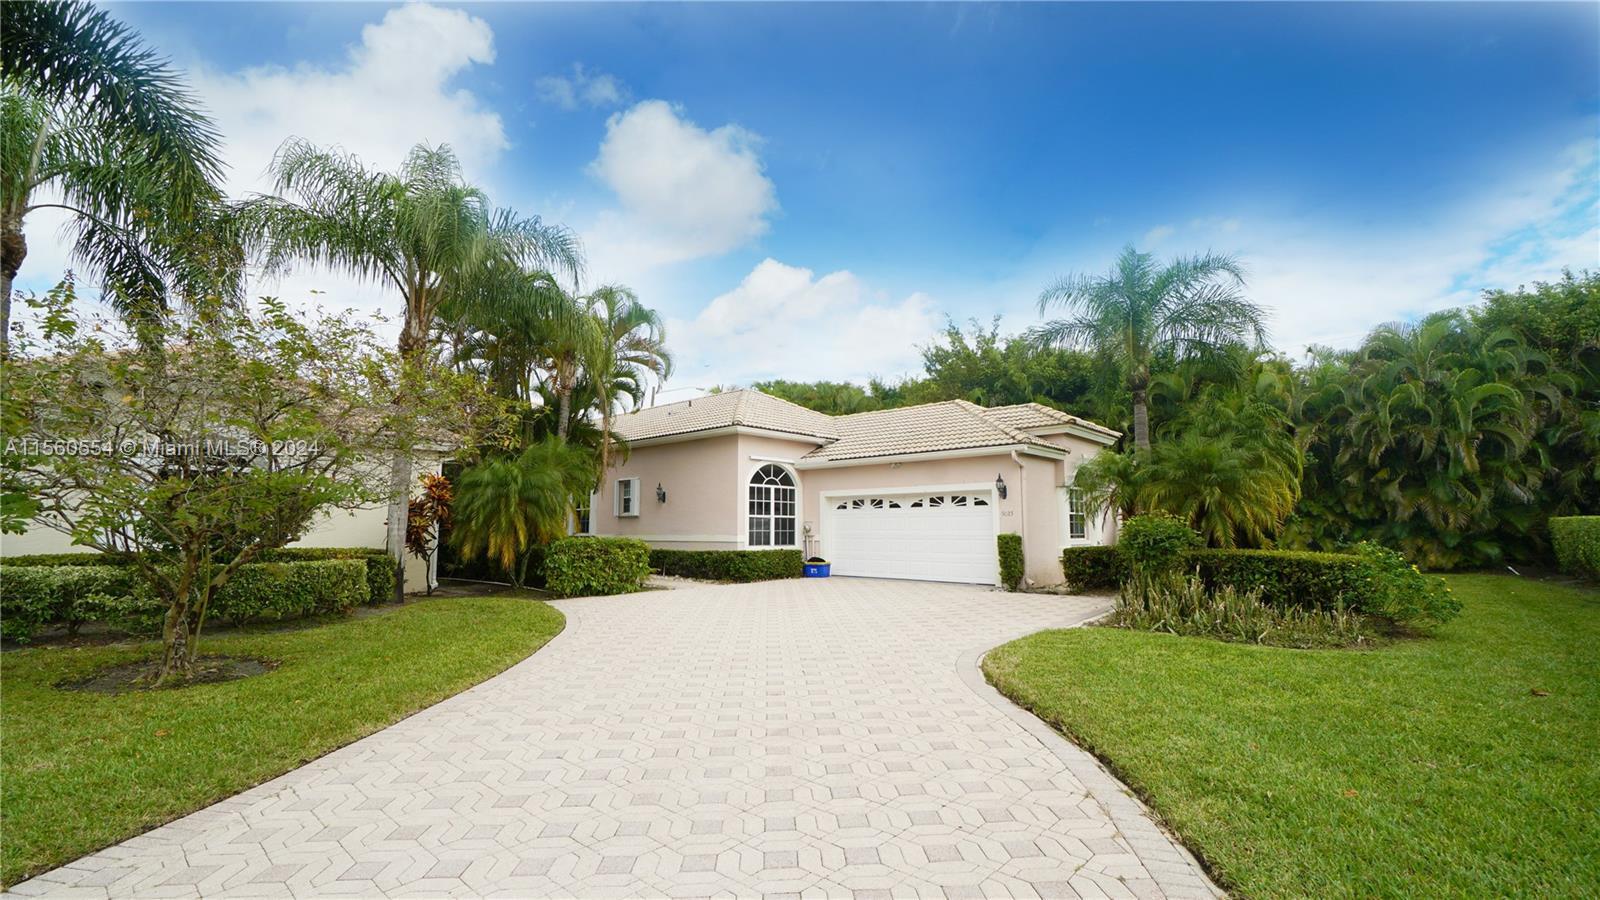 Cul-de-sac, 4 bedrooms and 3 & 1/2 bath ranch home in the heart of west Boca. Annual rental featurin